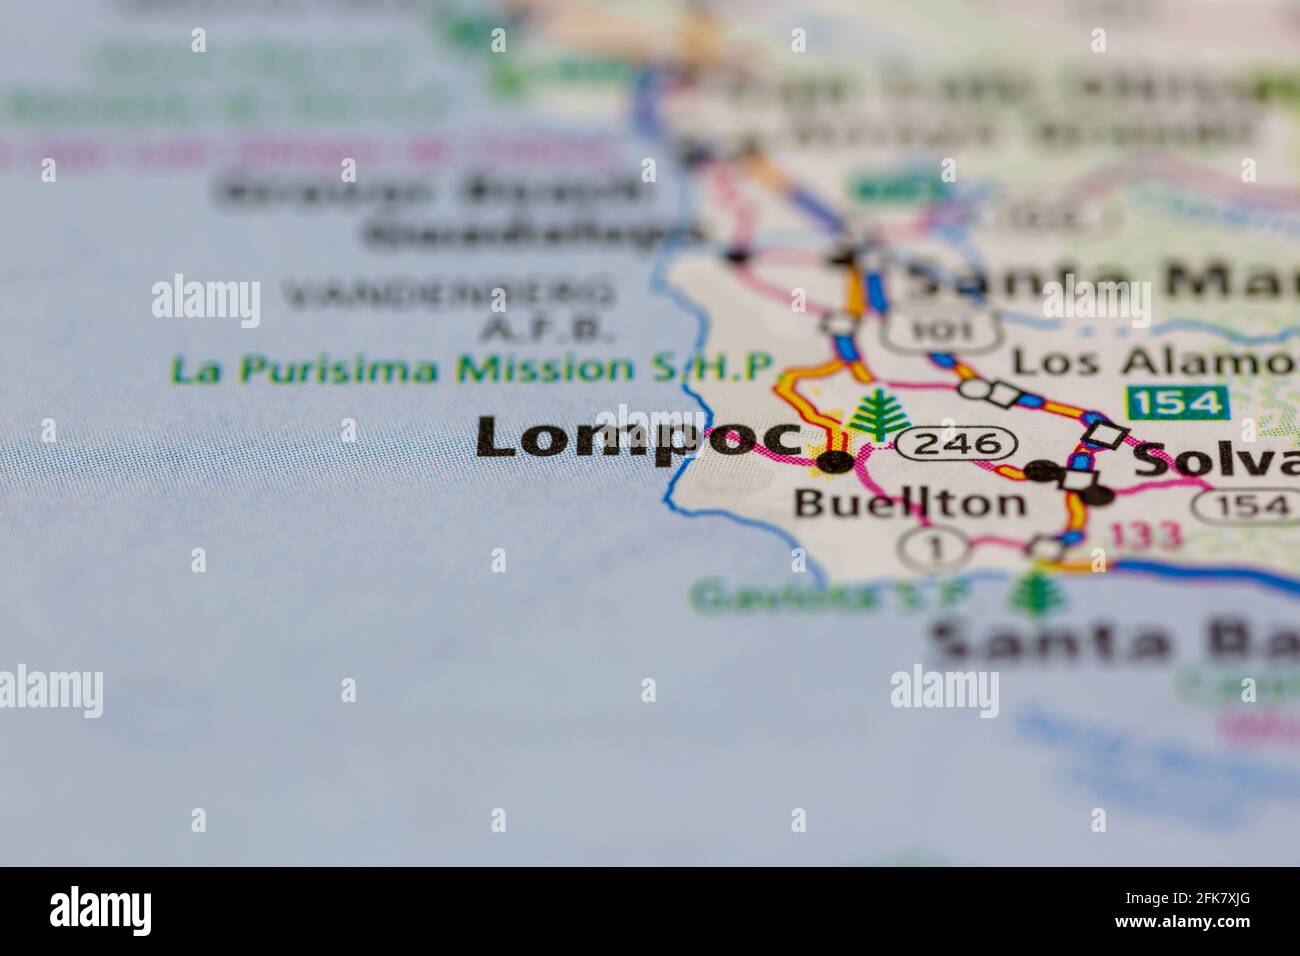 Lompoc California USA shown on a Geography map or road map Stock Photo